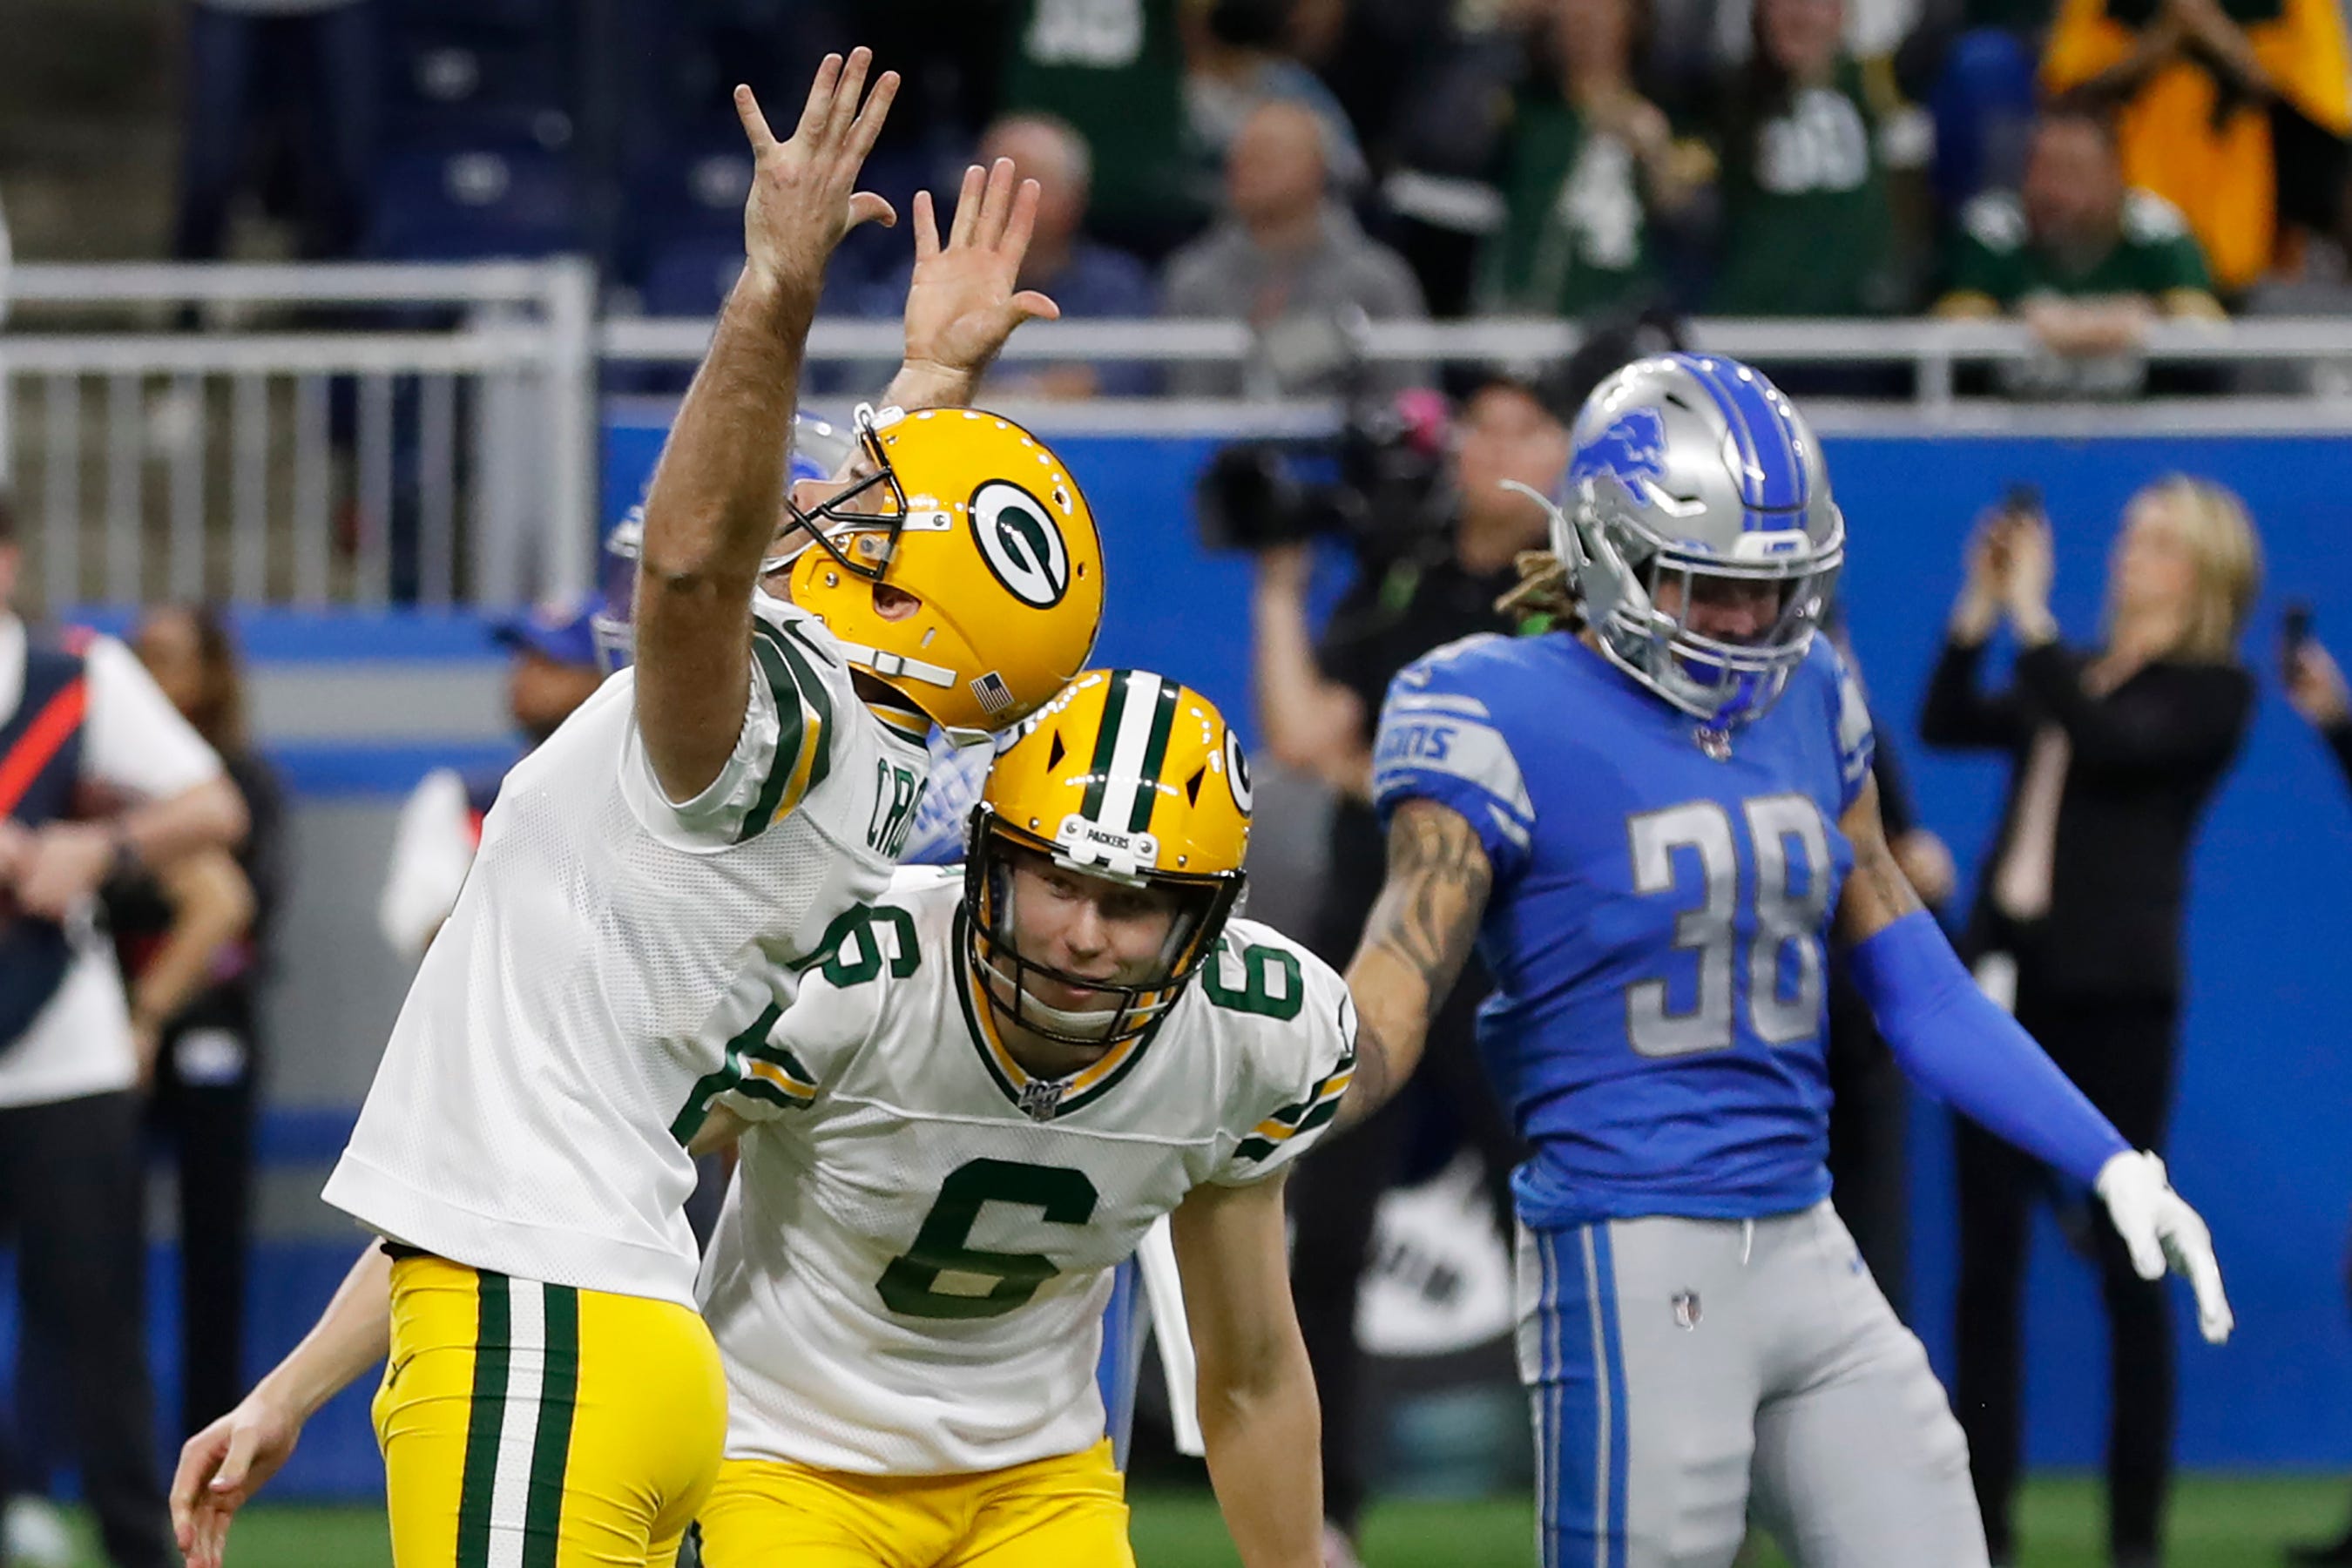 Green Bay Packers kicker Mason Crosby raises his arms after making the winning field goal during the second half of an NFL football game against the Detroit Lions, Sunday, Dec. 29, 2019, in Detroit. Lions defensive back Mike Ford (38) looks on.